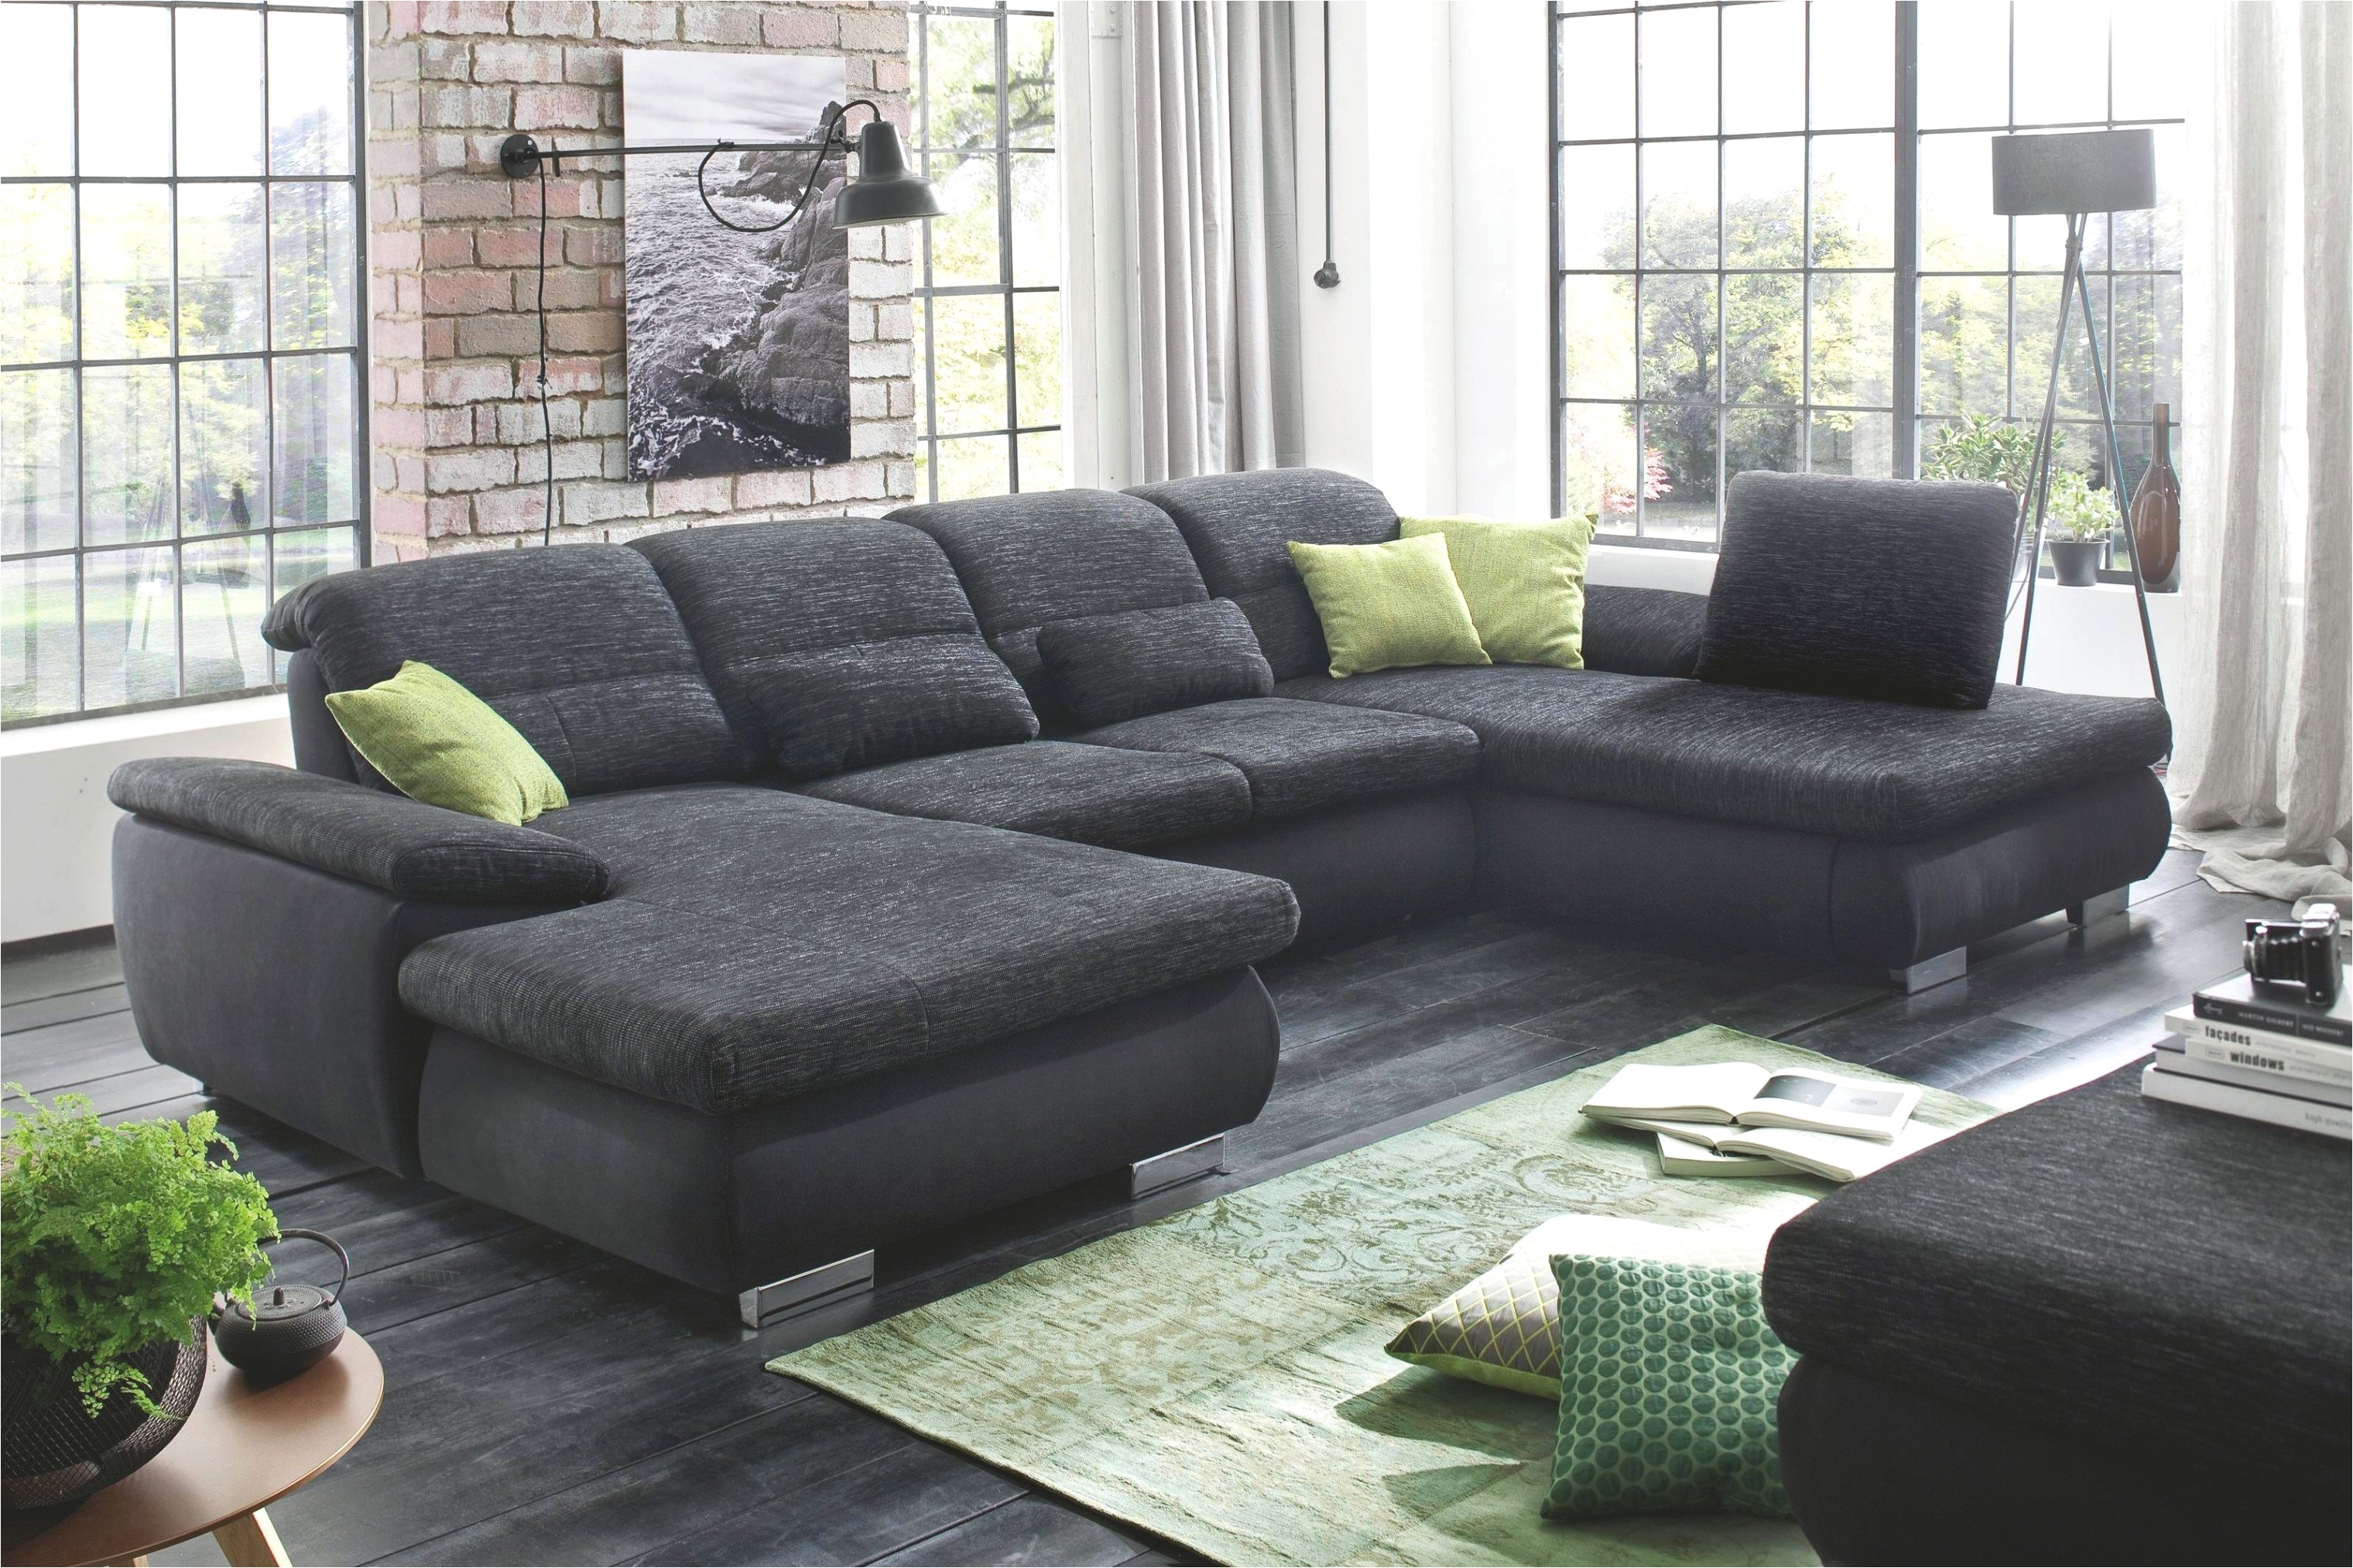 Small Couches for Basement Beautiful 52 Fresh sofa Bed for Small Spaces 52 s Home